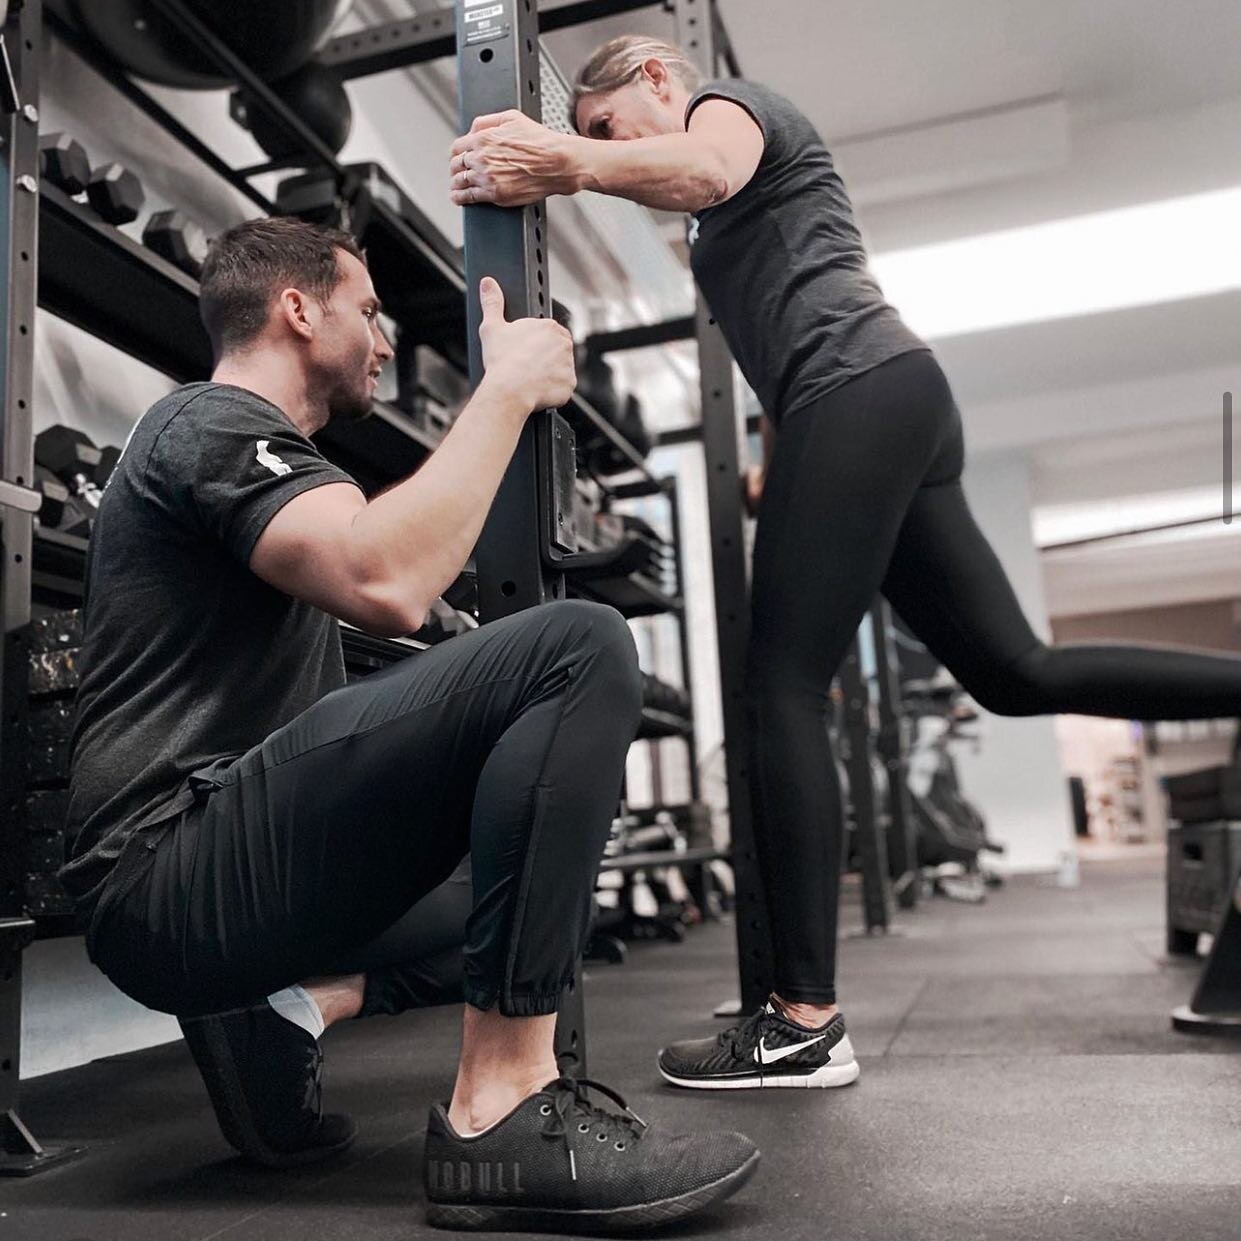 You are strong enough to start!

A few weekly doses of strength training can have an enormous positive impact on your life, mind and physique.

And you don't need to be at a certain level to start. Strength training is for everyone, and we individual